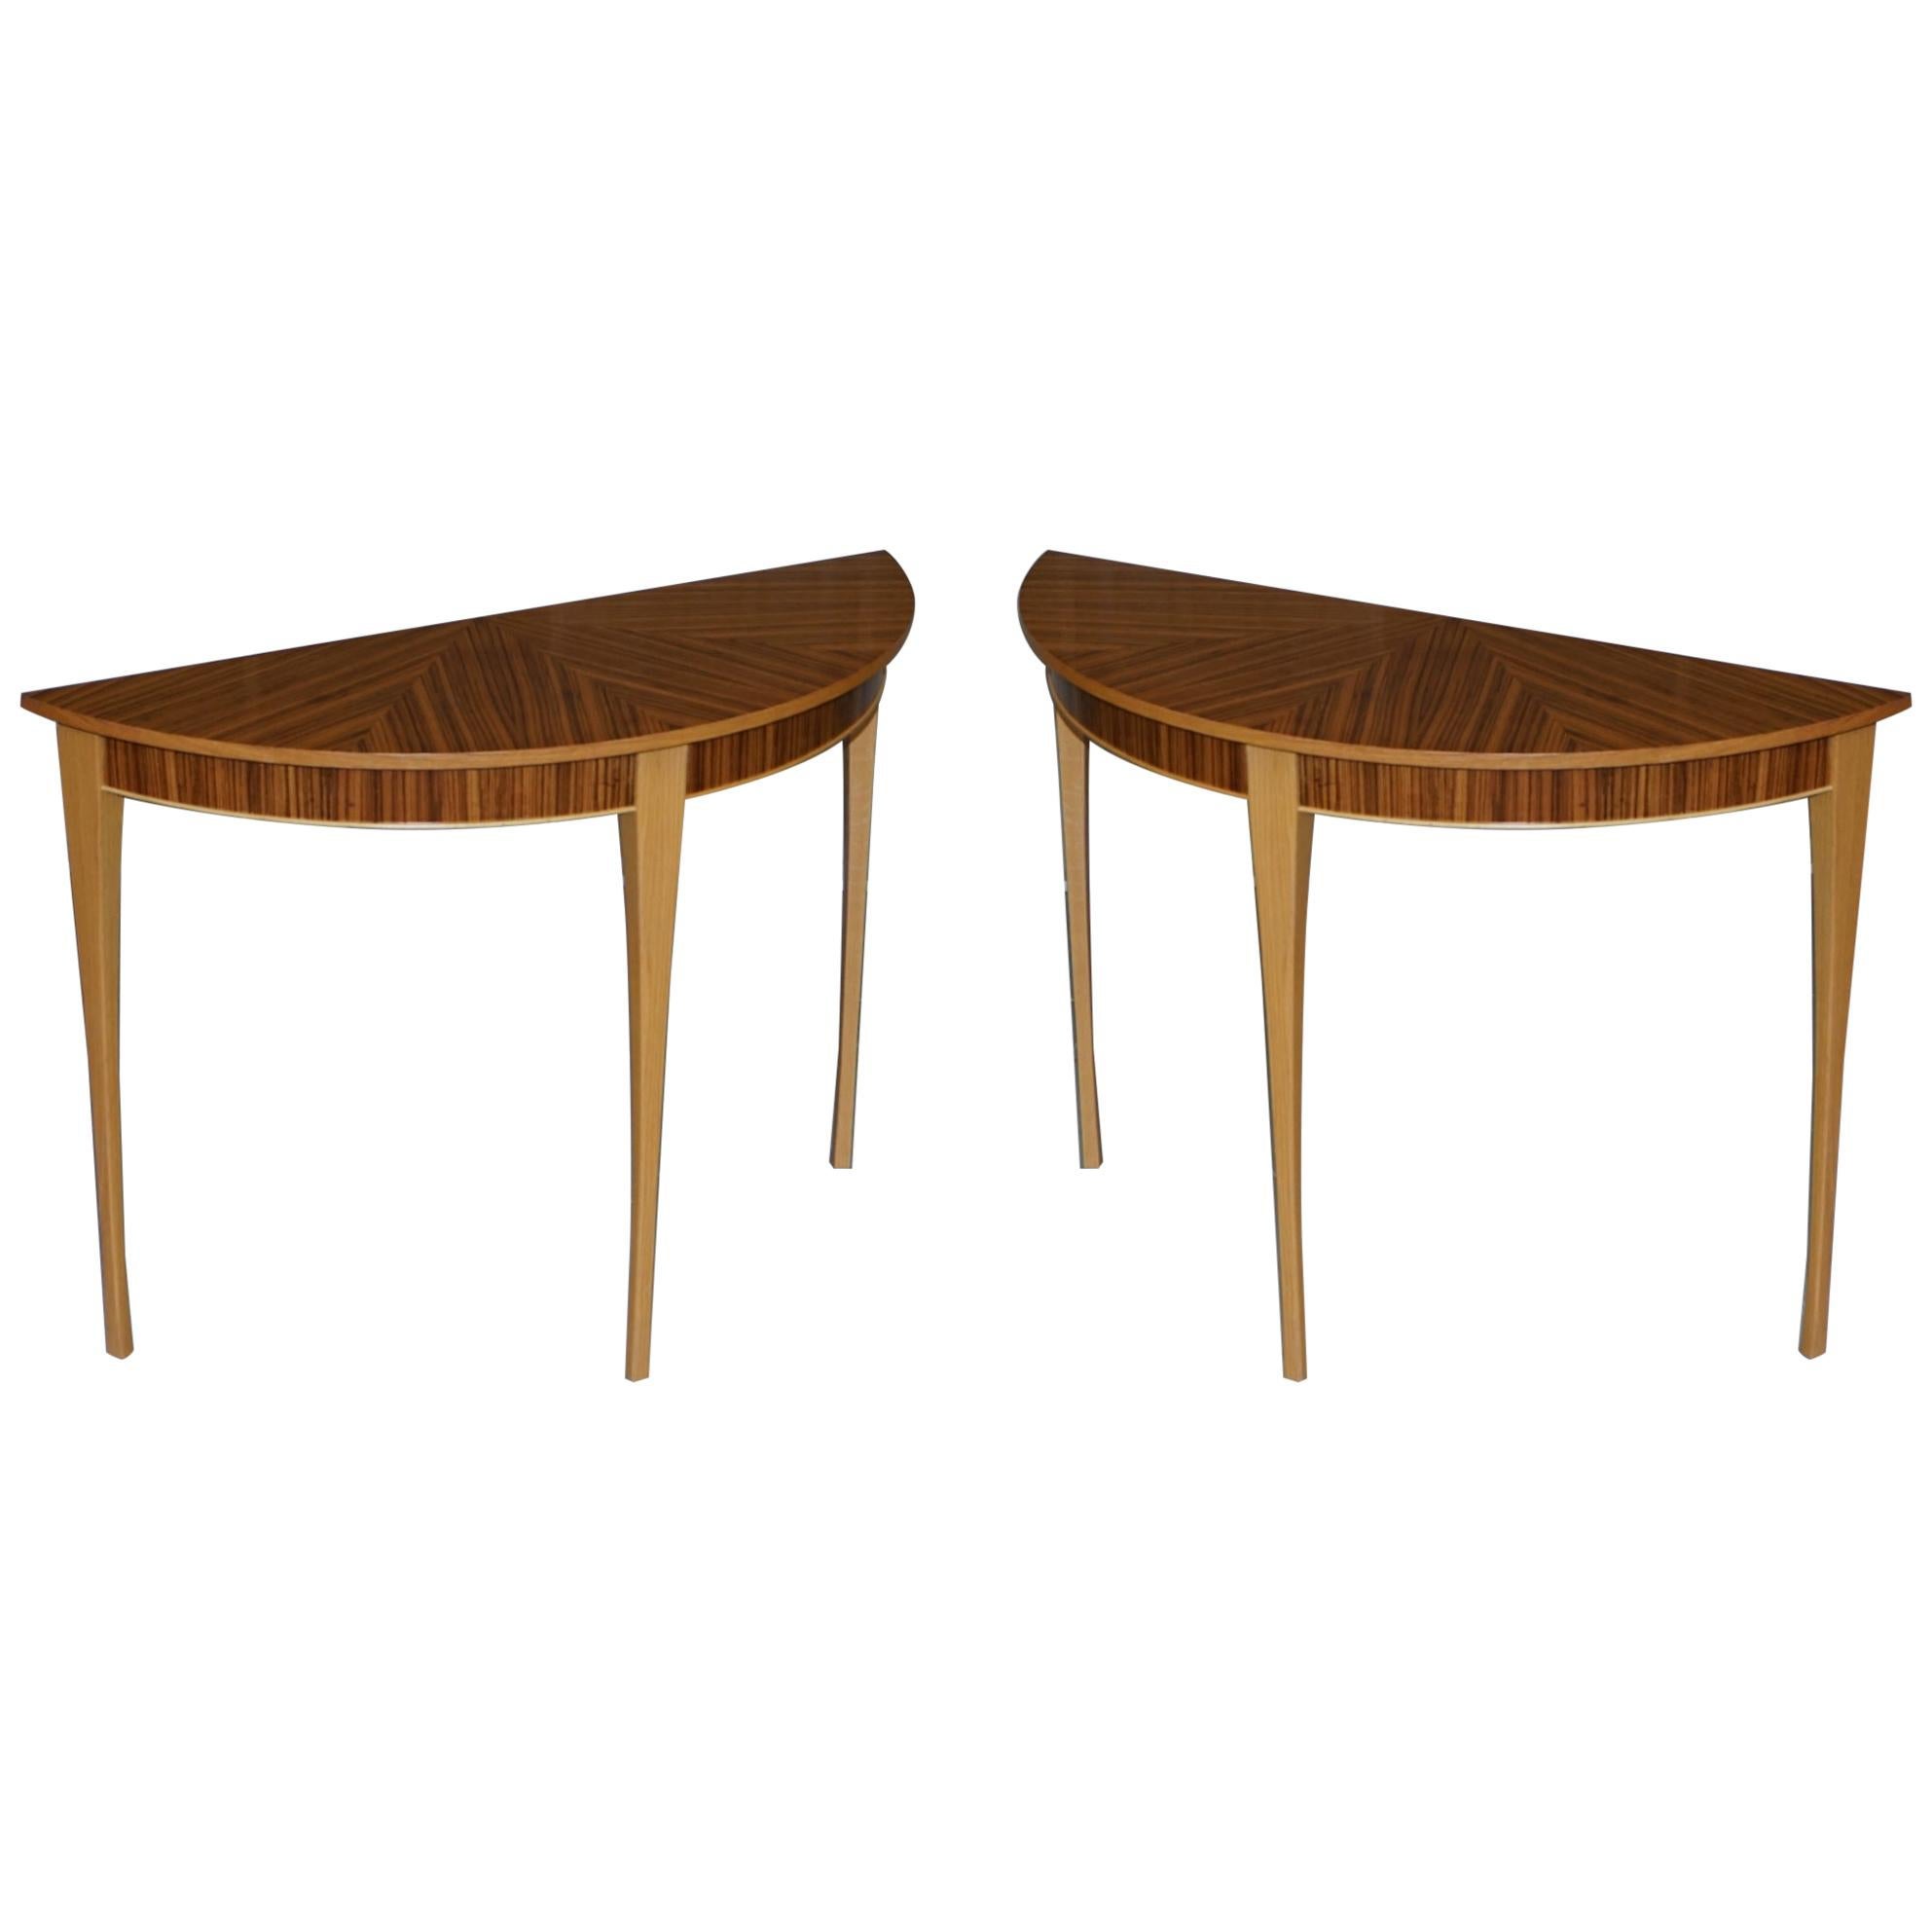 X2 Lovely Bevan Funnell Phoenix Zebrano Wood Demilune Console Tables